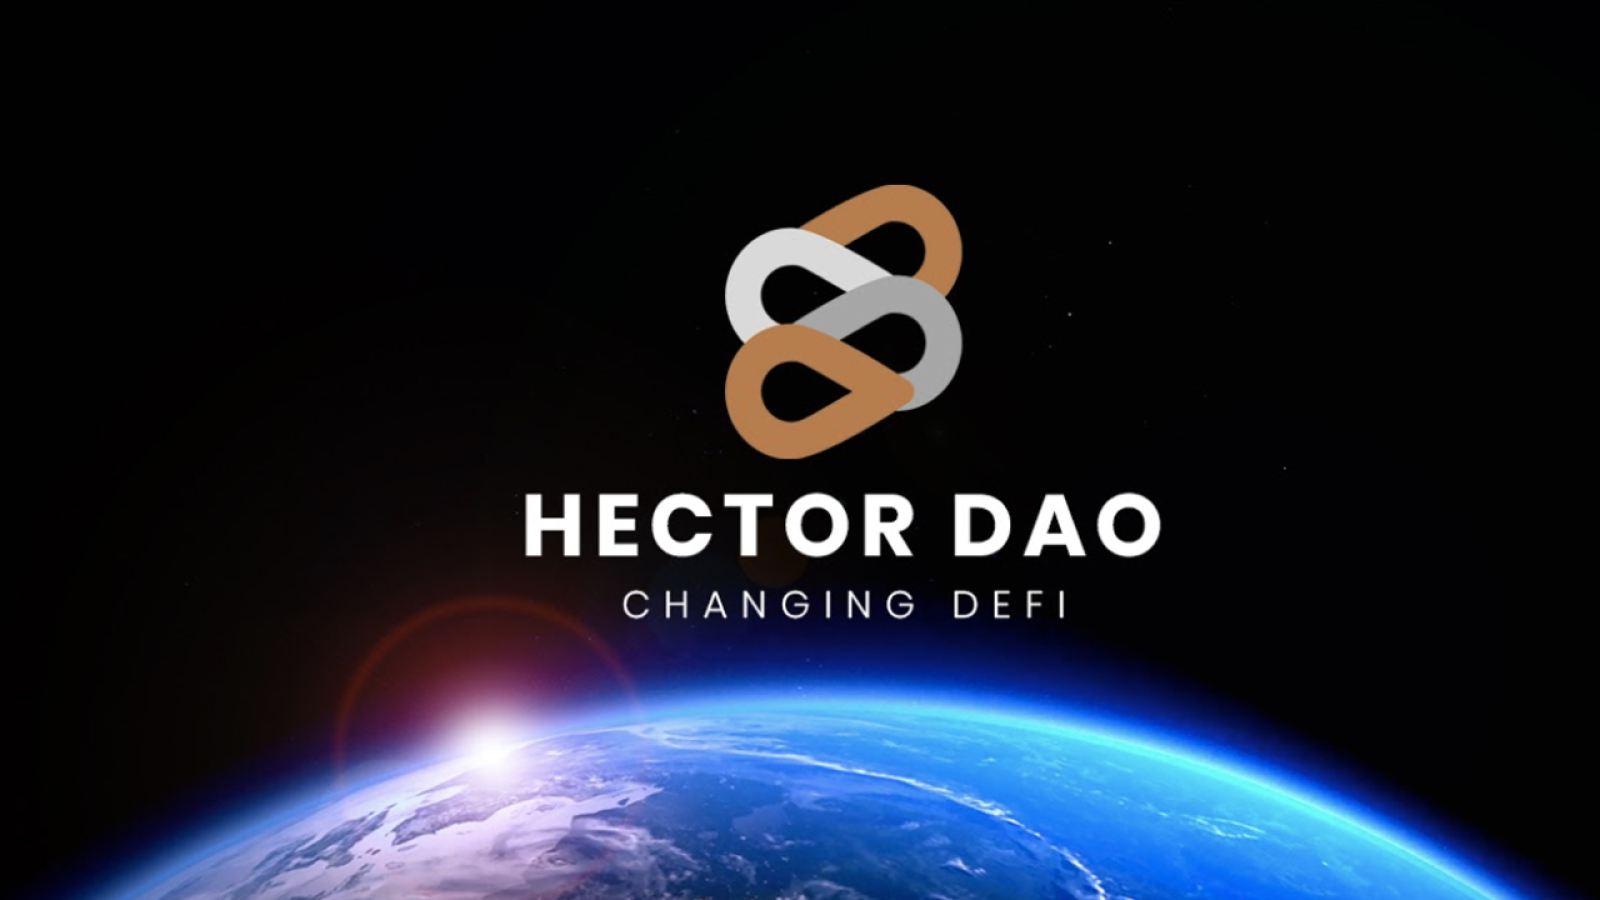 Hector DAO Aims to Revamp P2E NFT Gaming in 2022 Along With Other Major Projects